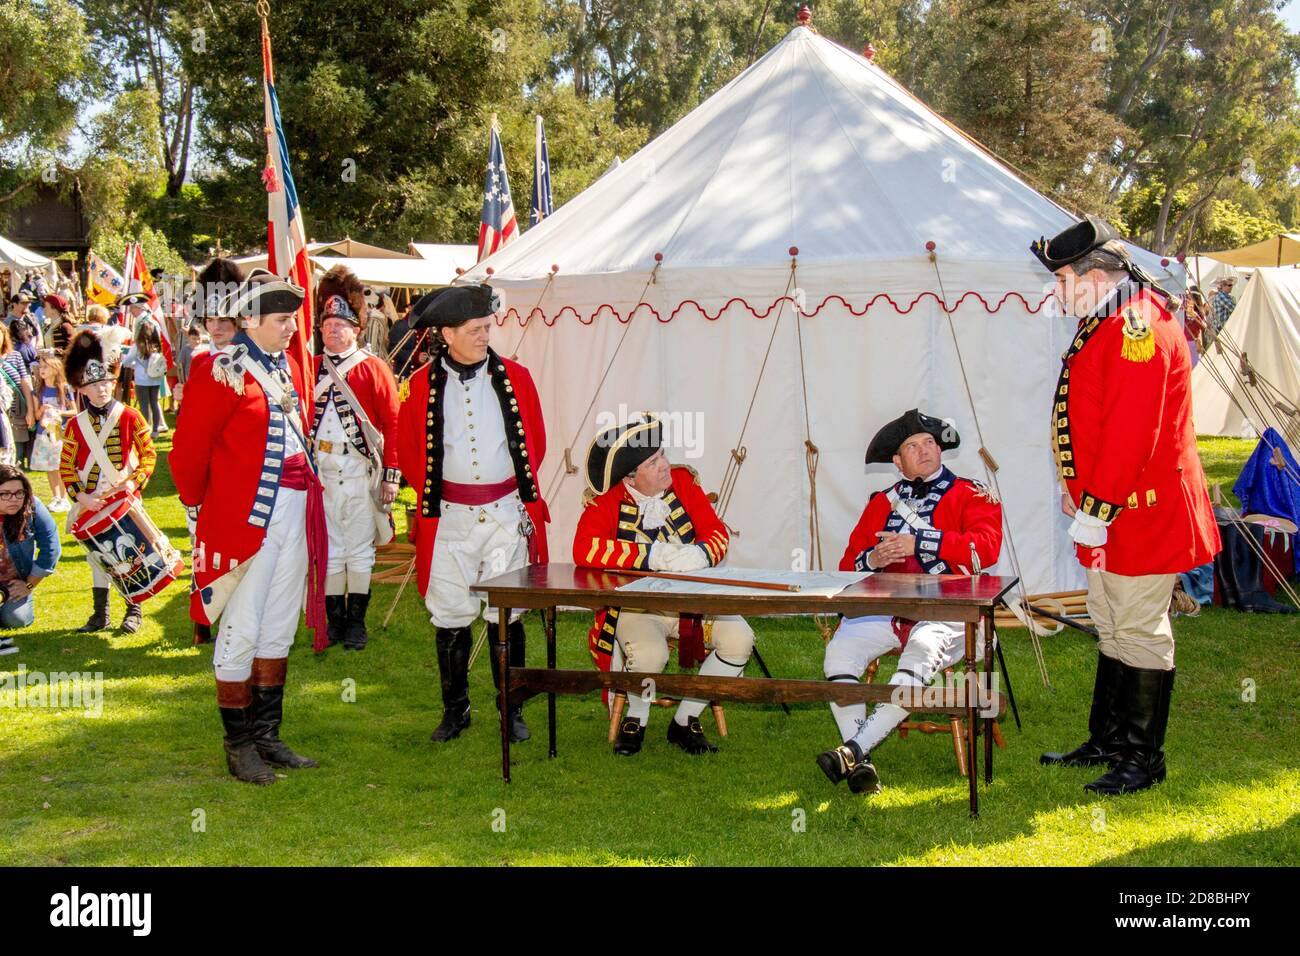 Redcoat British Army officers are portrayed by actors at an American Revolutionary War reenactment in a Huntington Beach, CA. Stock Photo